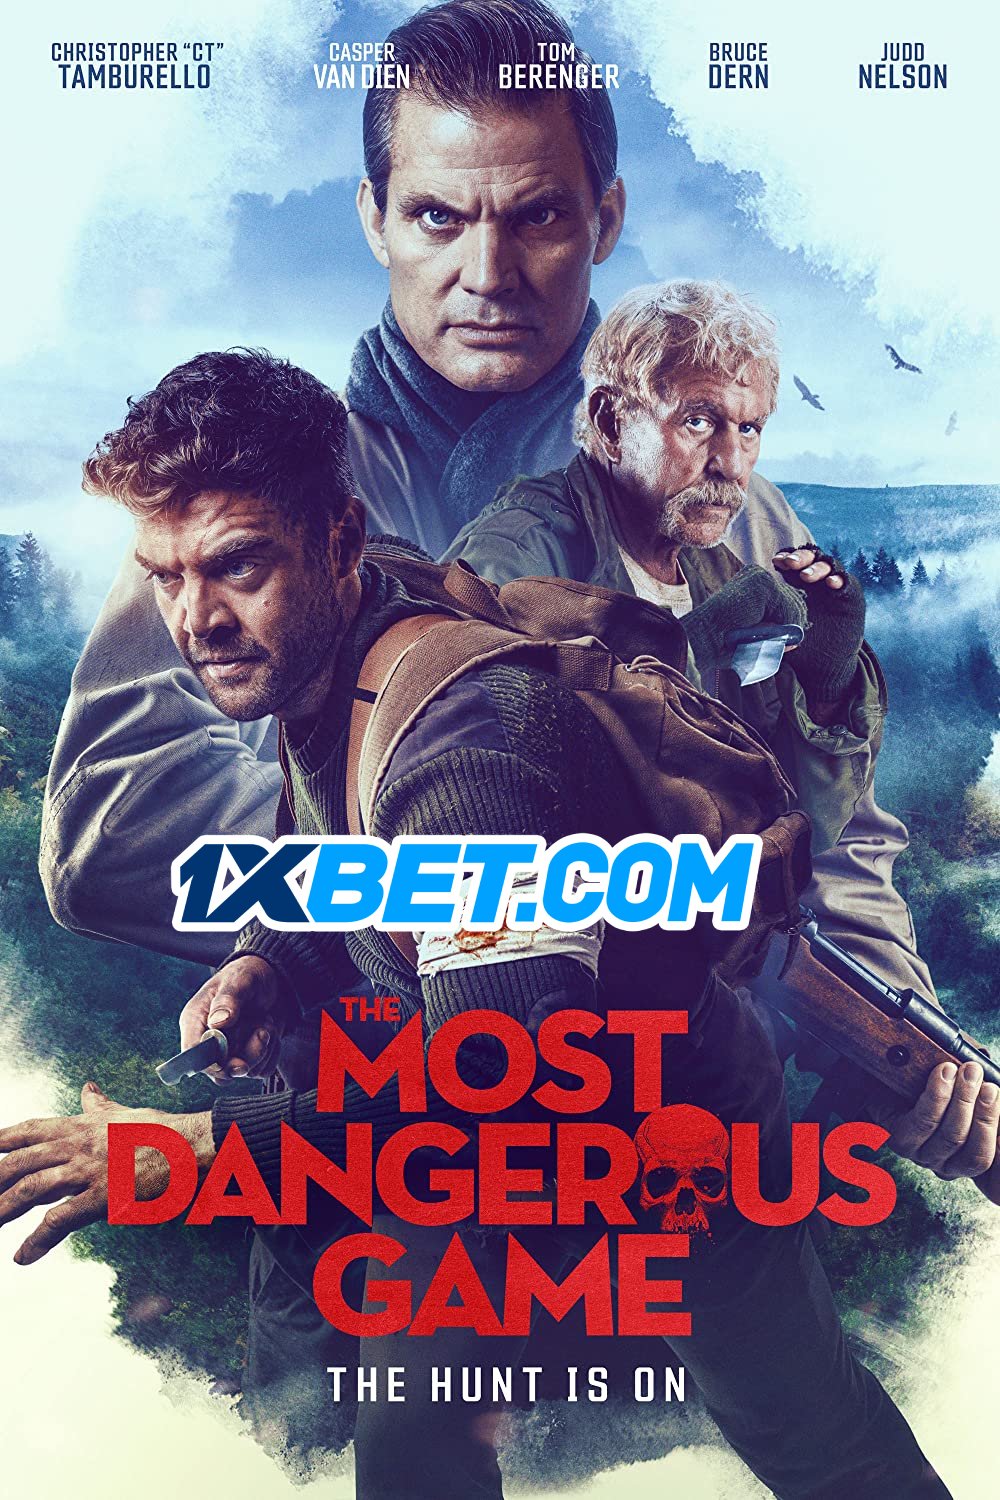 The Most Dangerous Game (2022) Bengali (Voice Over)-English WEBRip x264 720p